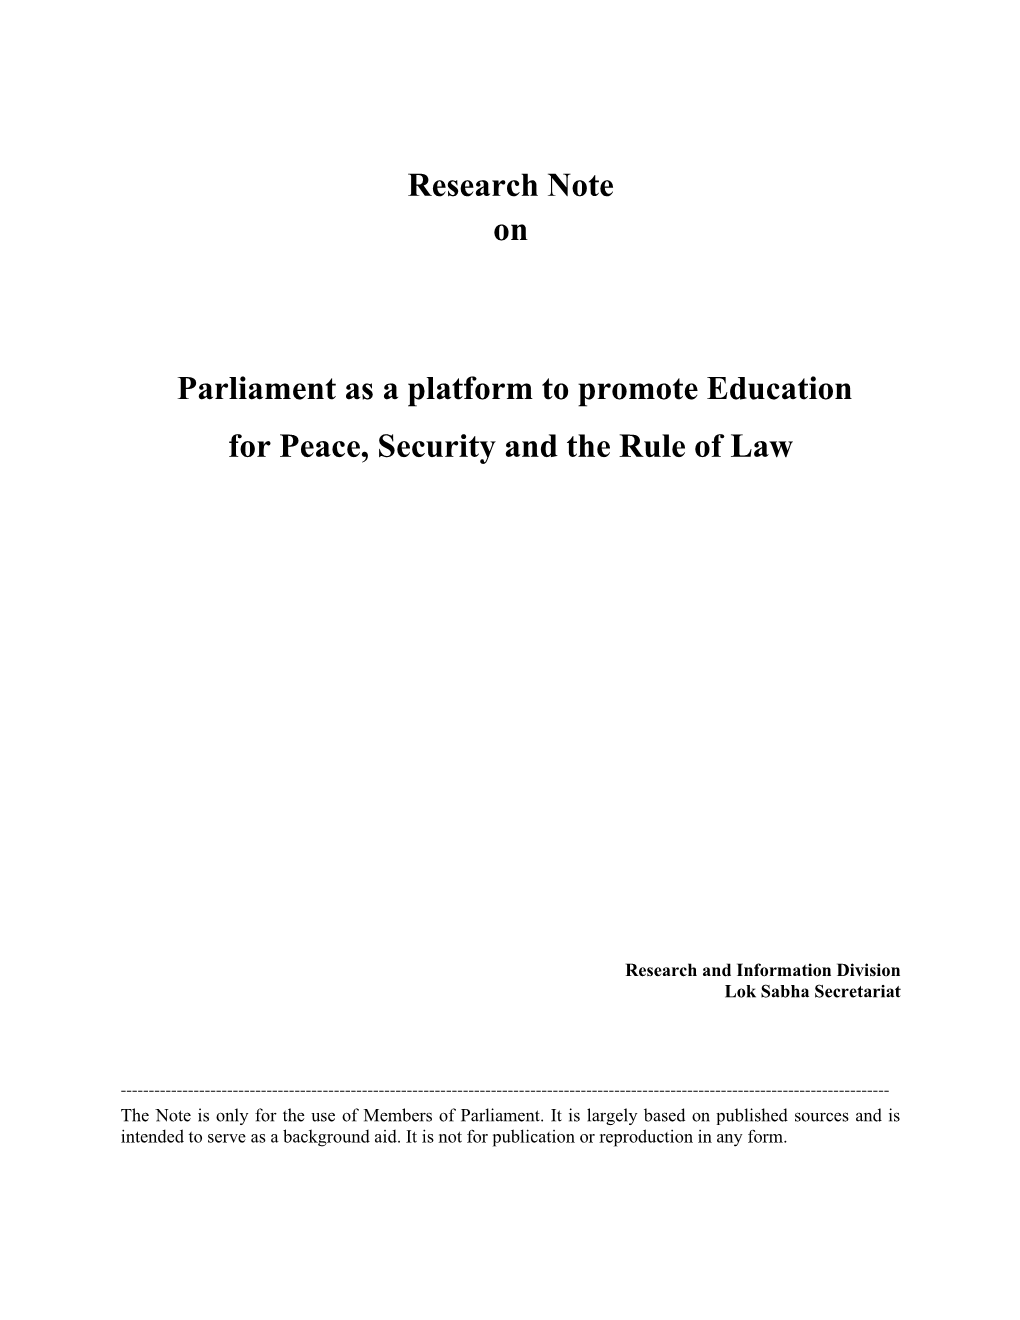 Research Note on Parliament As a Platform to Promote Education For